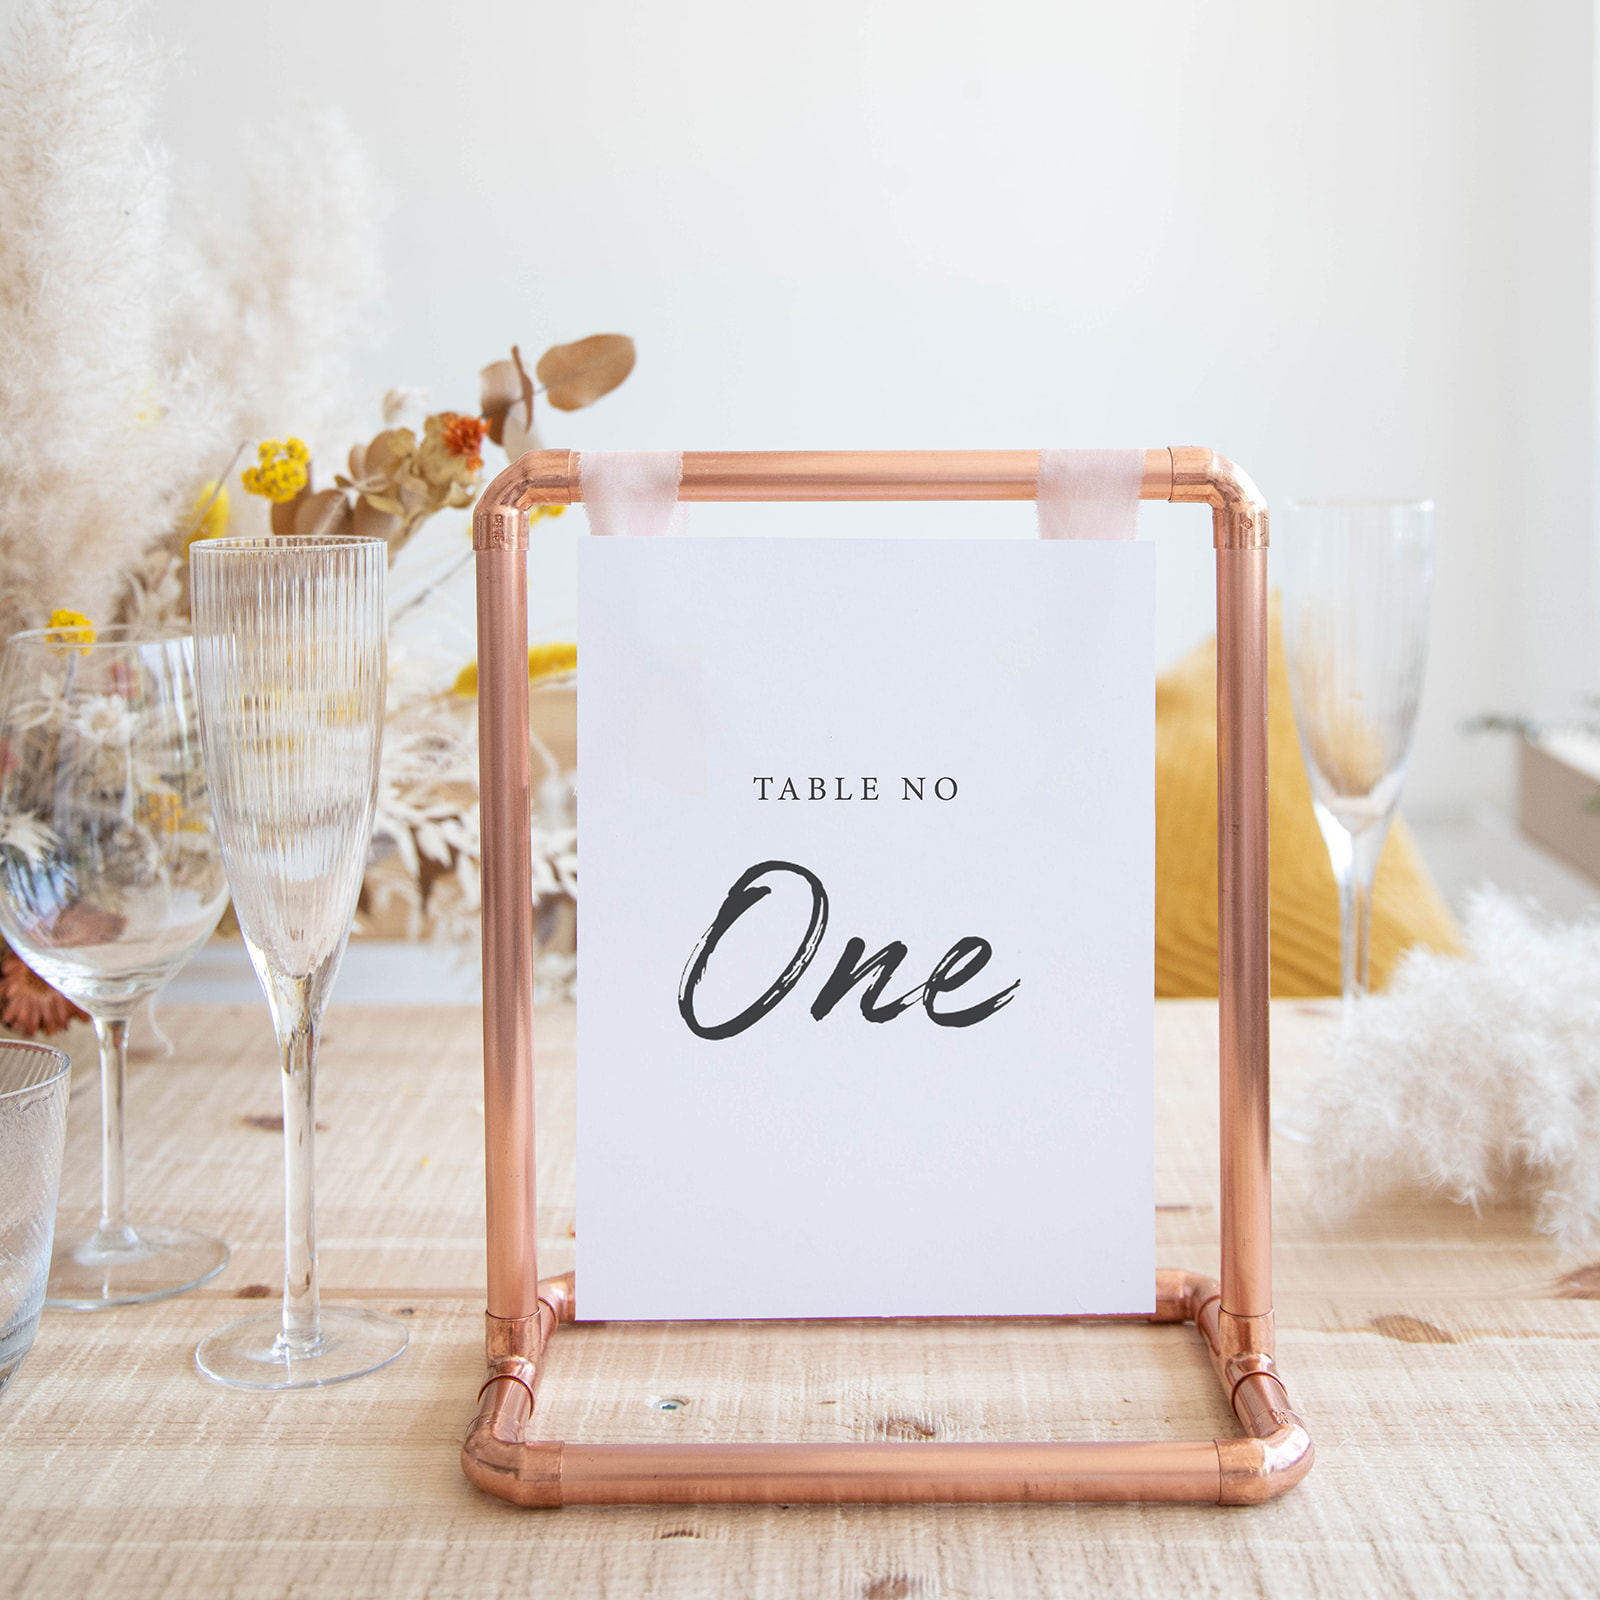 Little Deer Mini Copper Place Name Table Number Holder for Weddings & Celebrations - Small